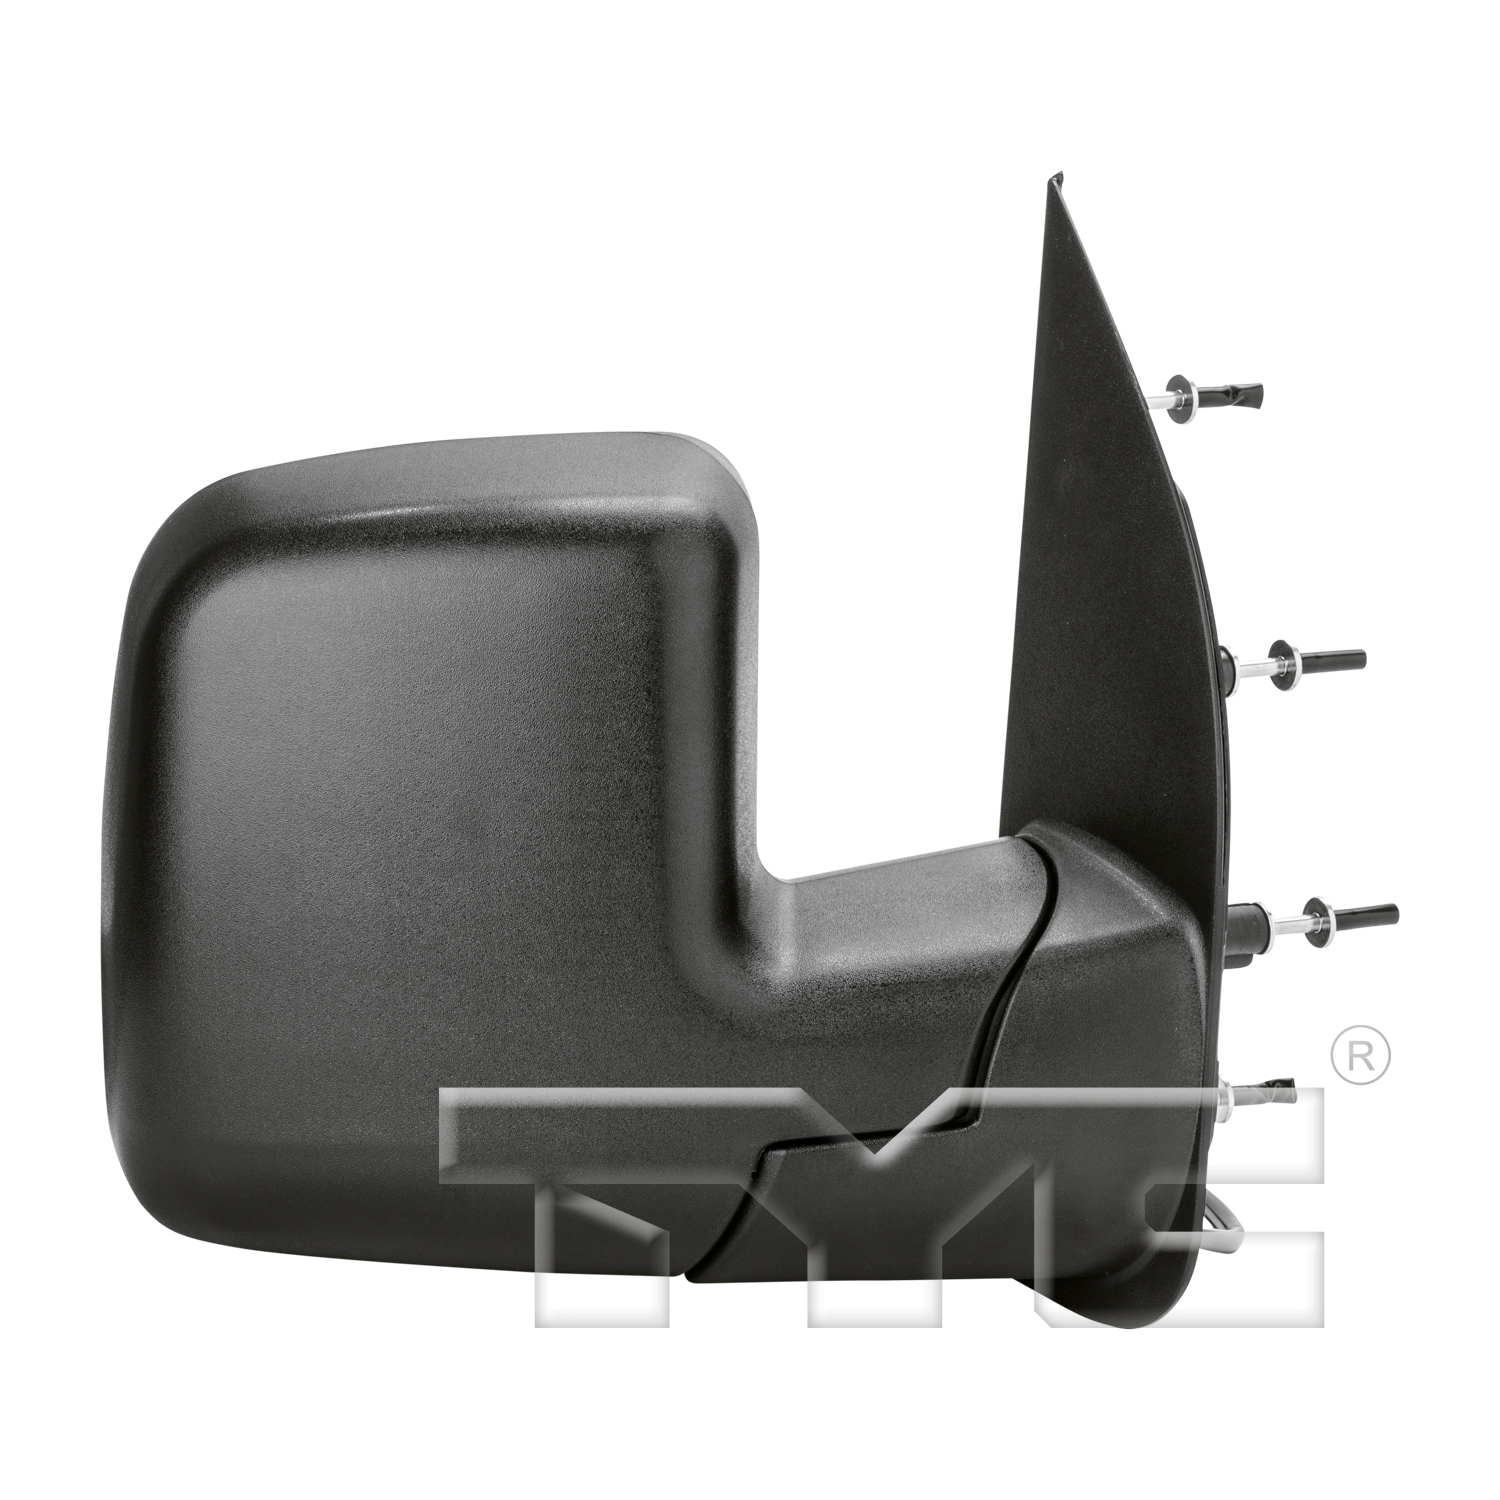 Aftermarket MIRRORS for FORD - E-450 SUPER DUTY, E-450 SUPER DUTY,03-06,RT Mirror outside rear view